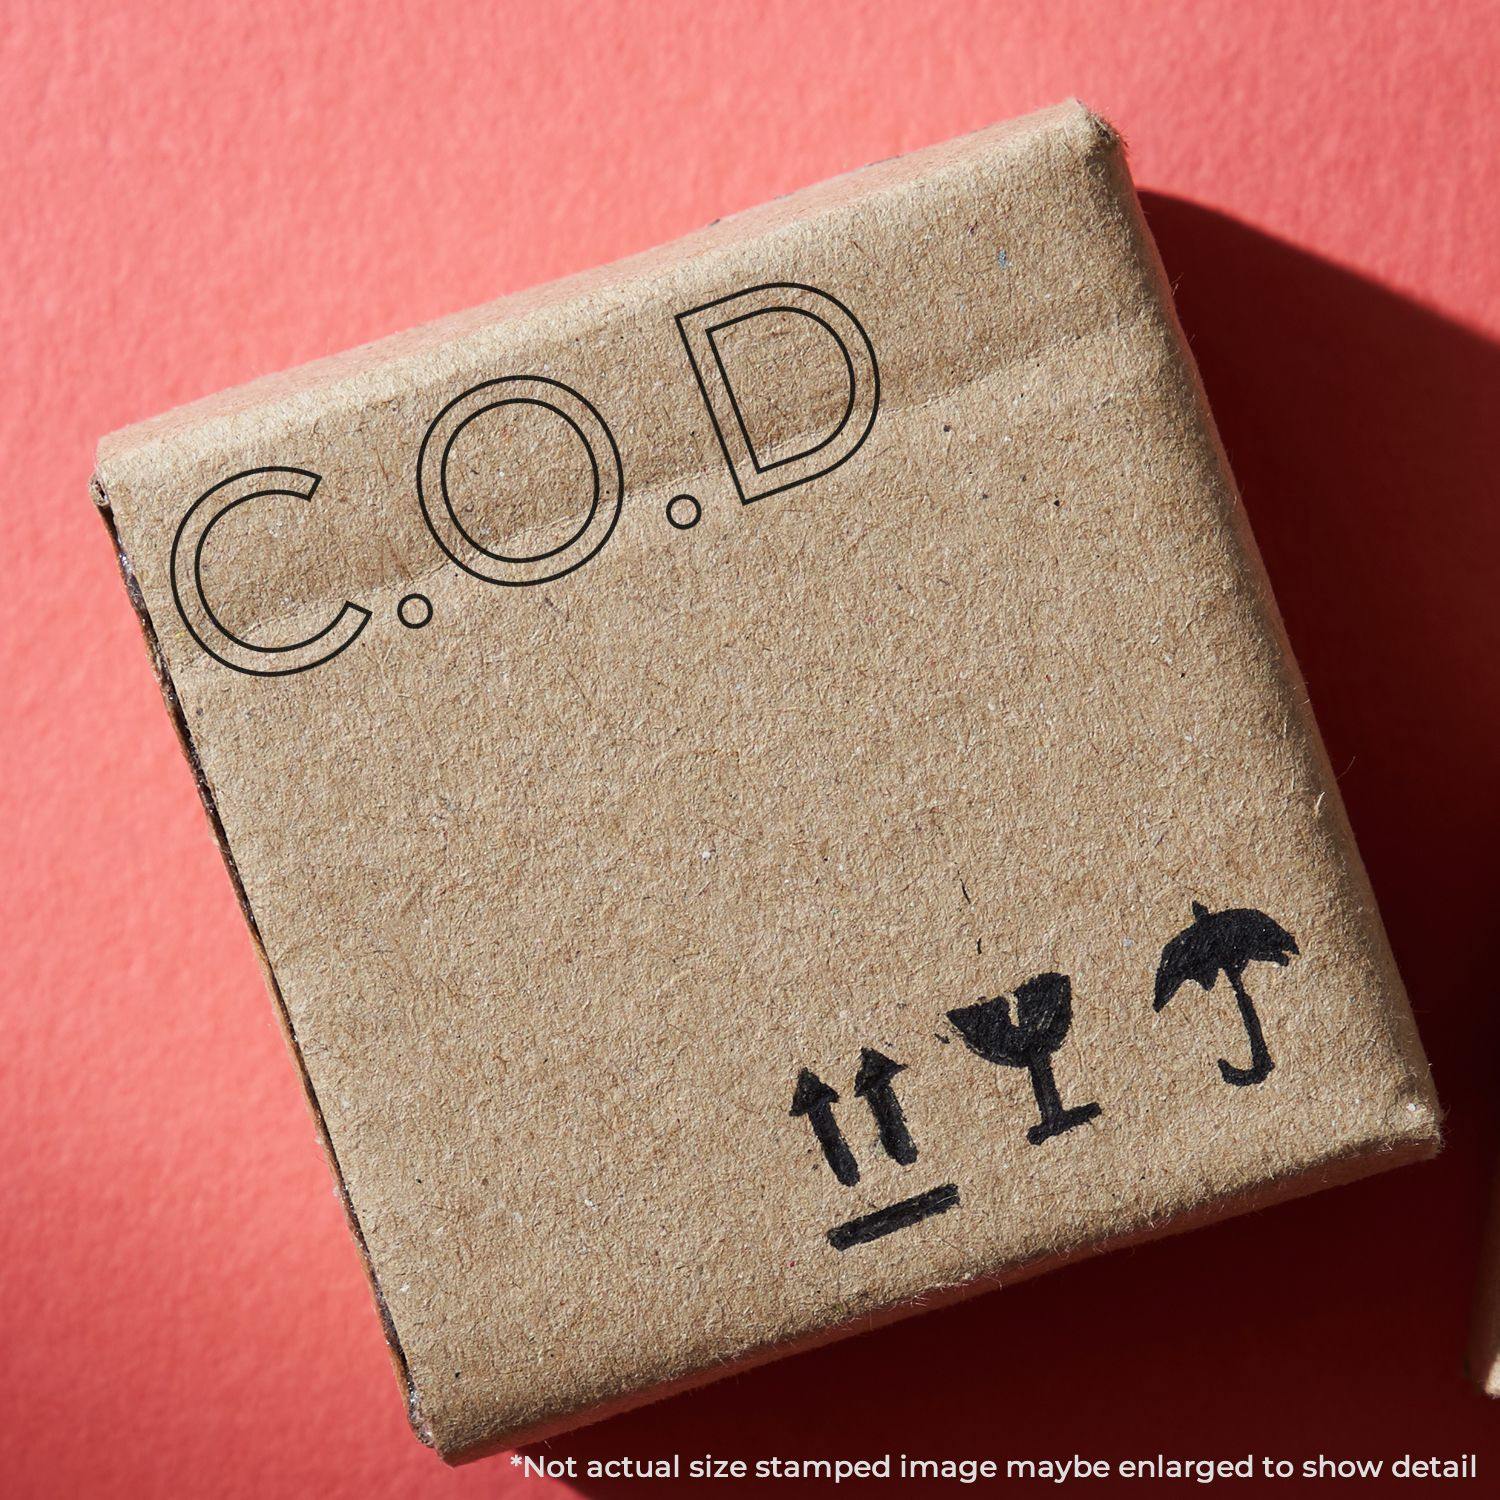 A self-inking stamp with a stamped image showing how the text "C.O.D" in an outline style is displayed after stamping.